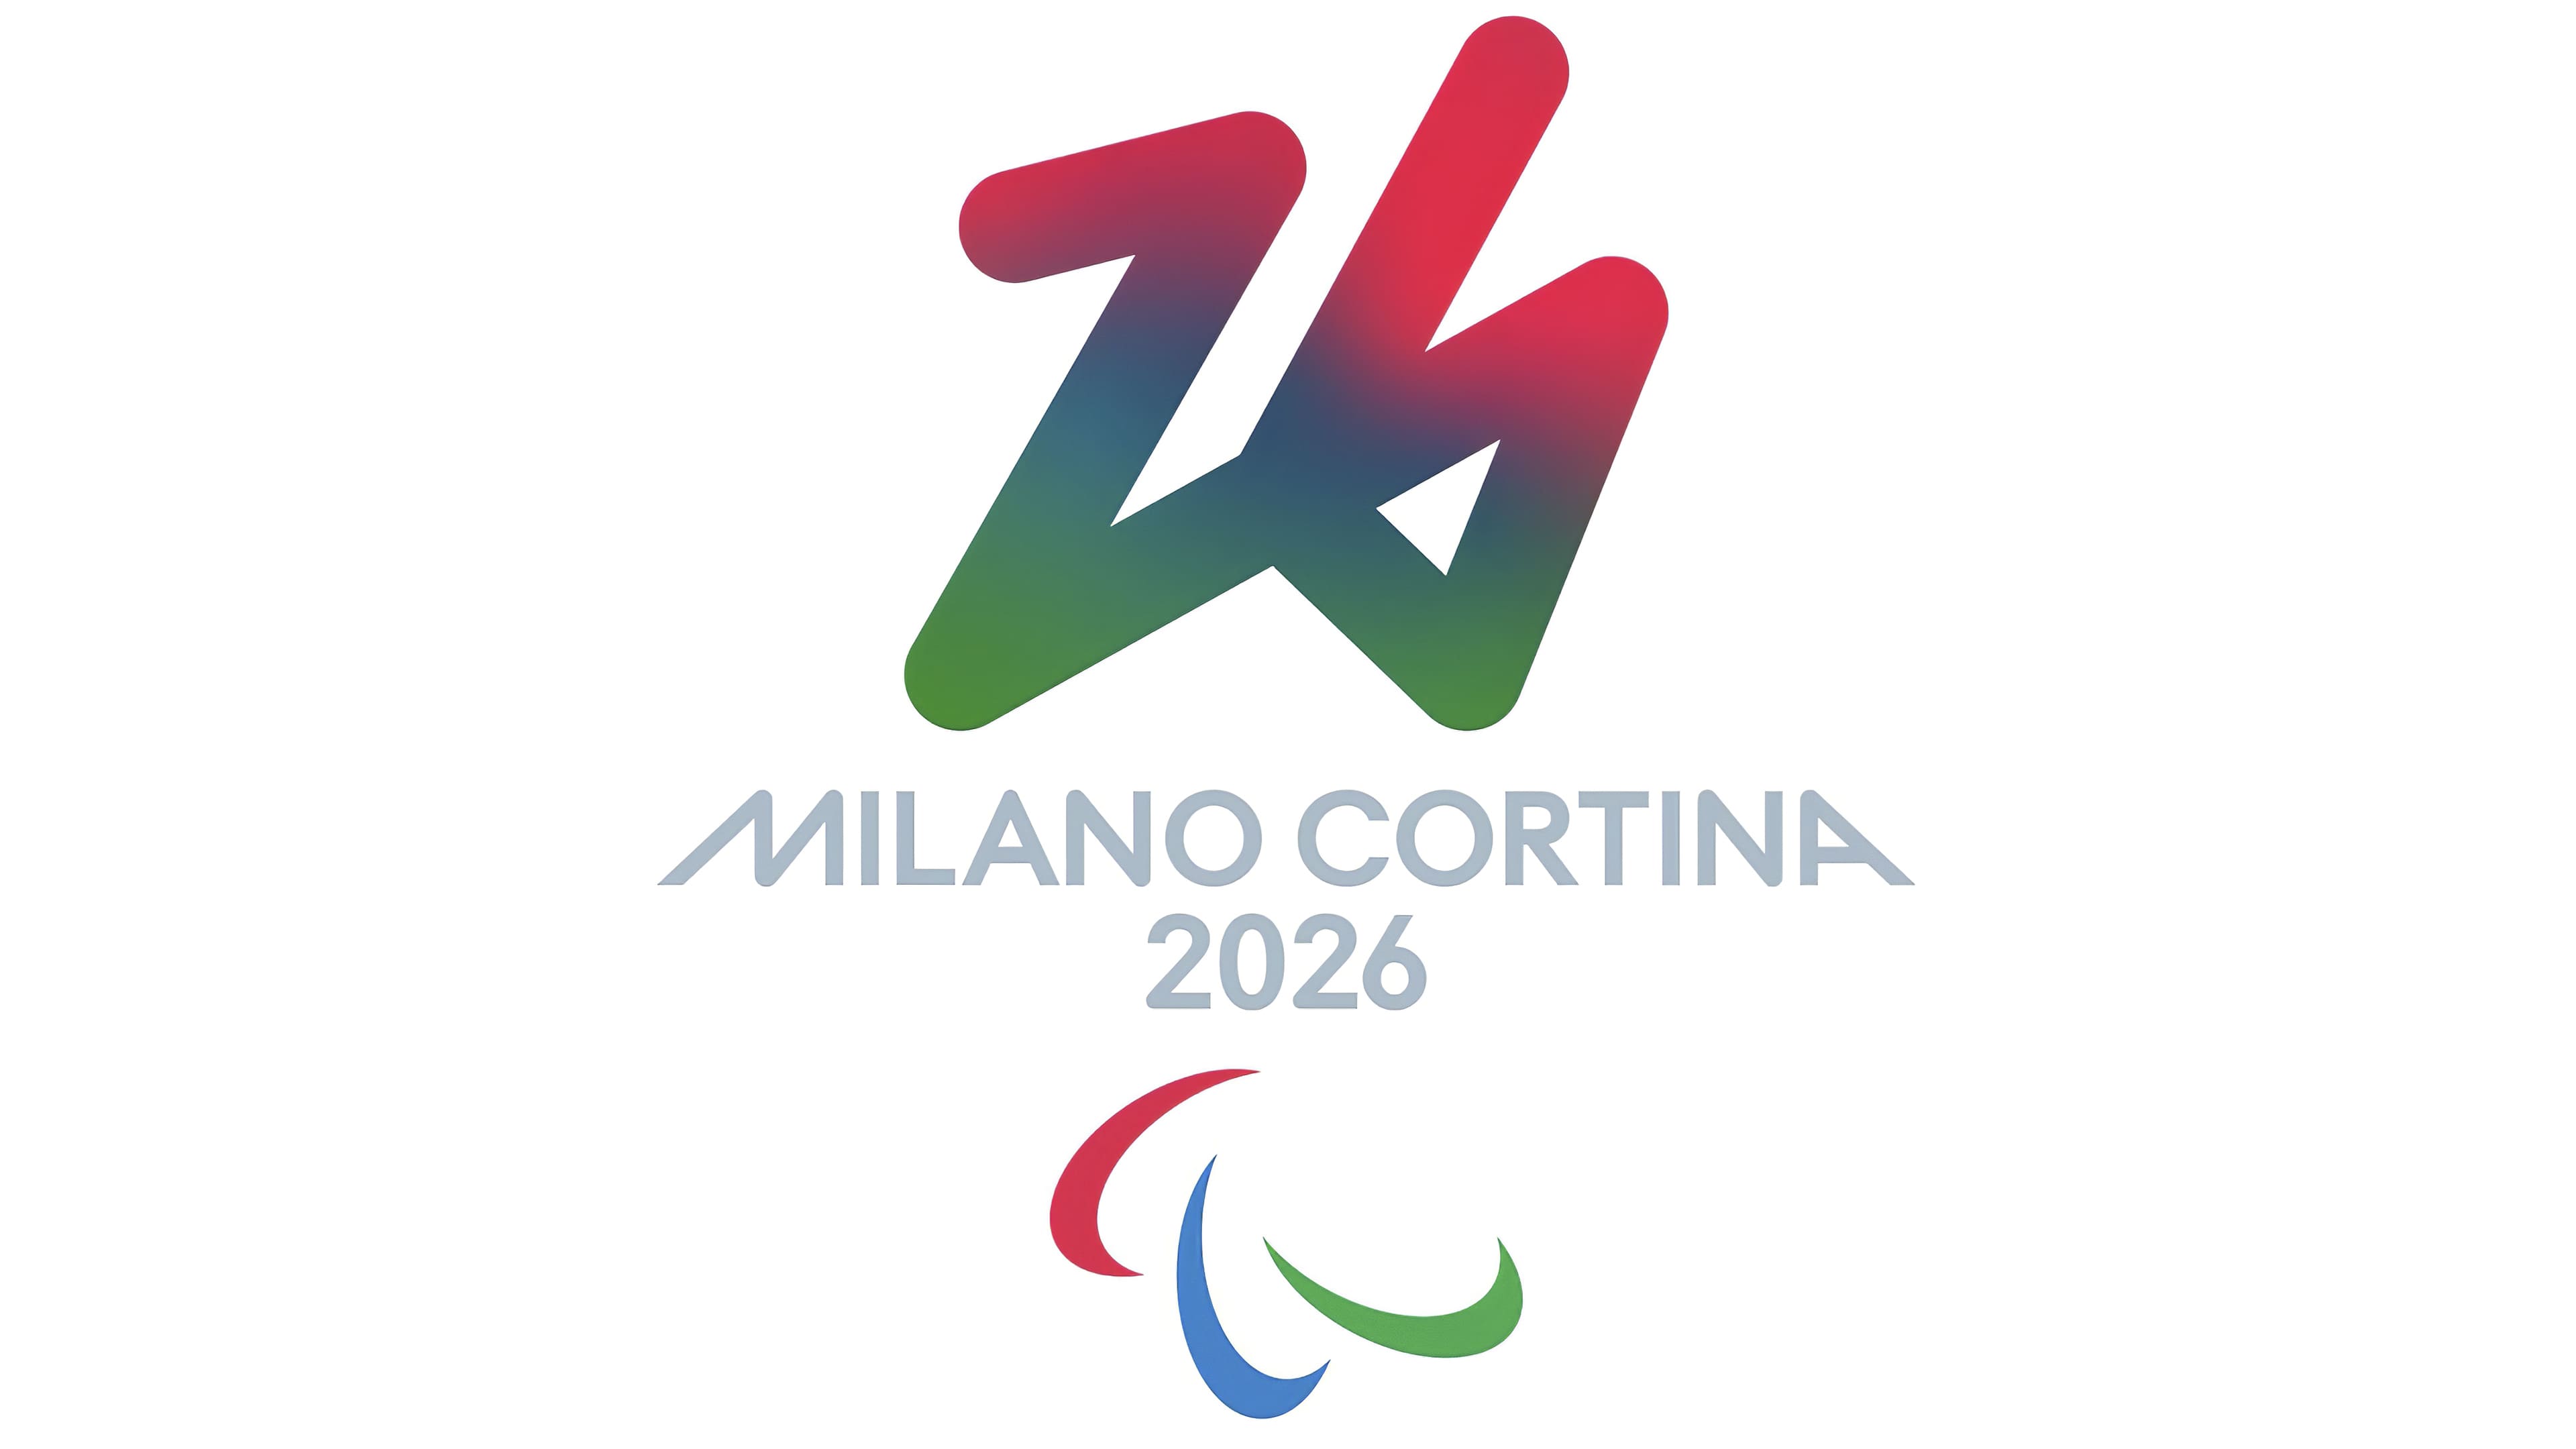 Winter Olympics 2026 the logo of the people chosen